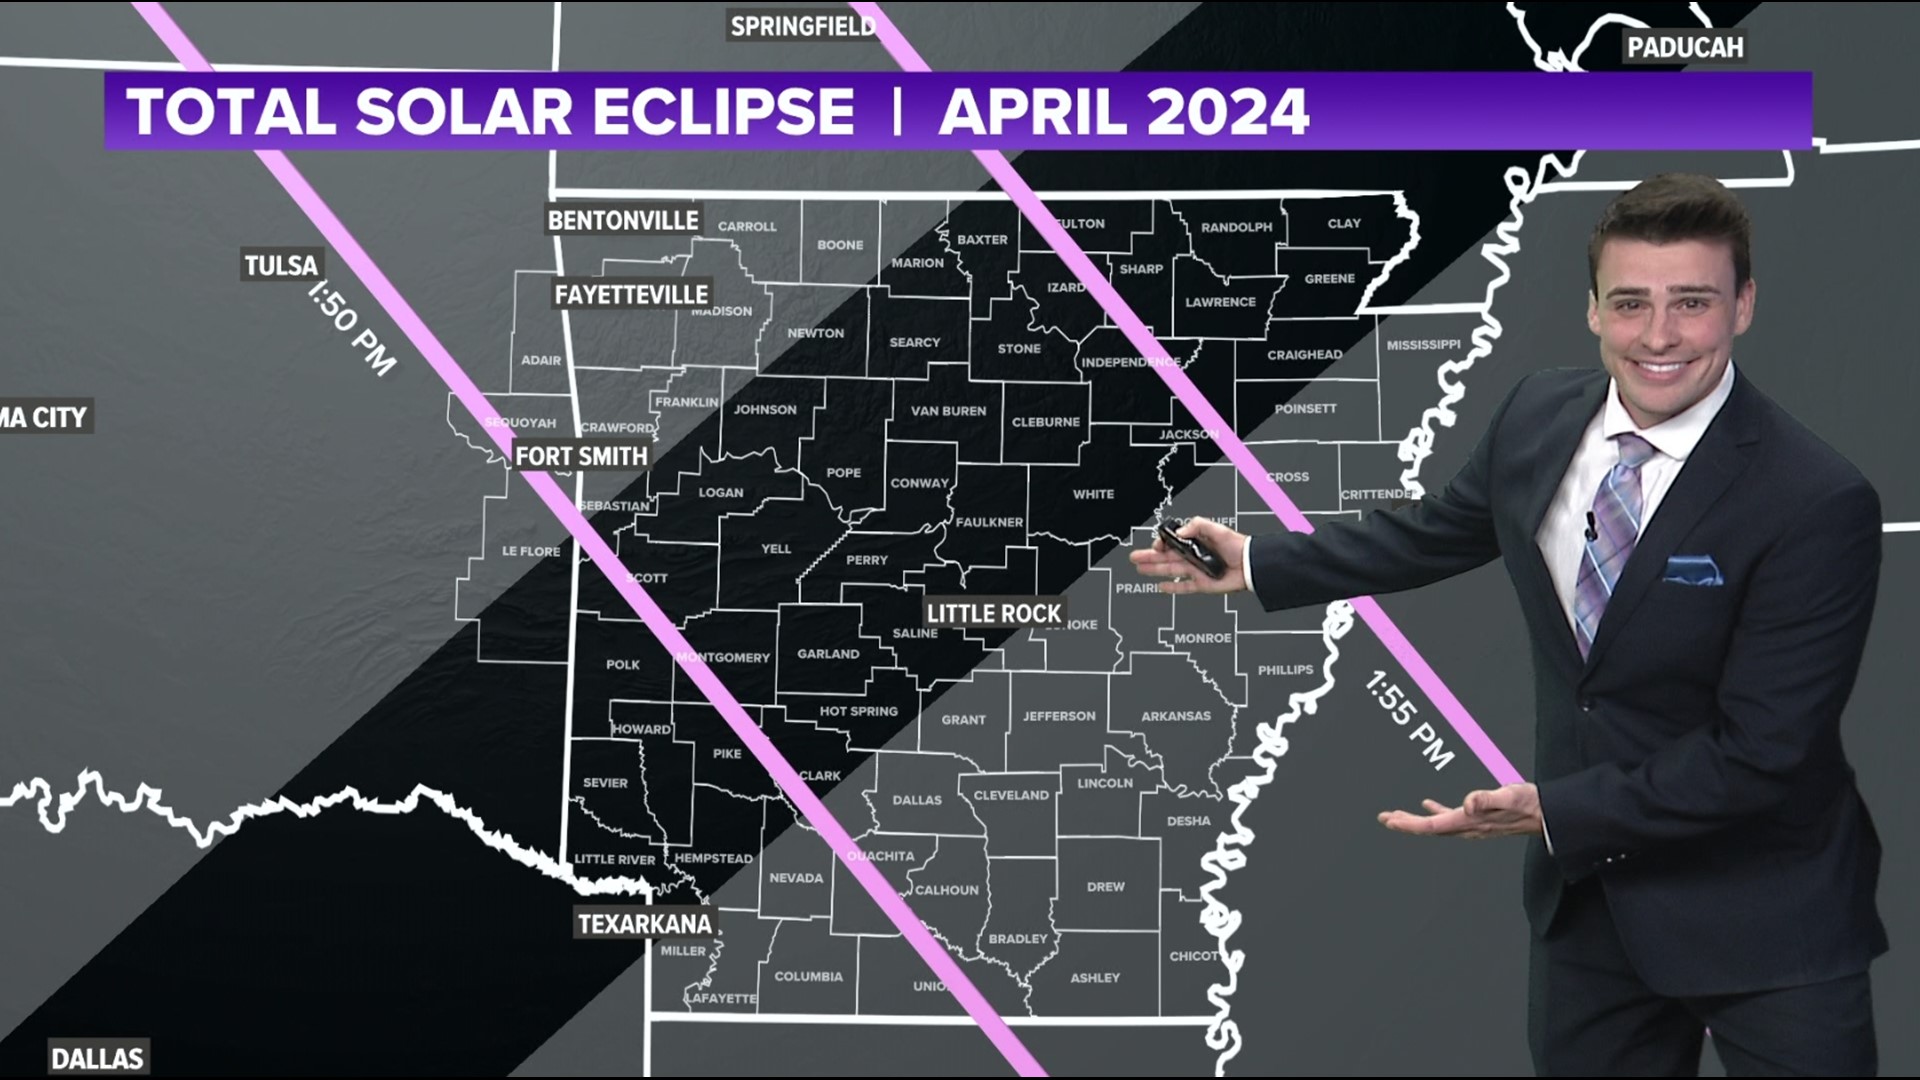 The path of totality will come right through Arkansas, starting in the southwestern sky and ending in the northeaster sky.